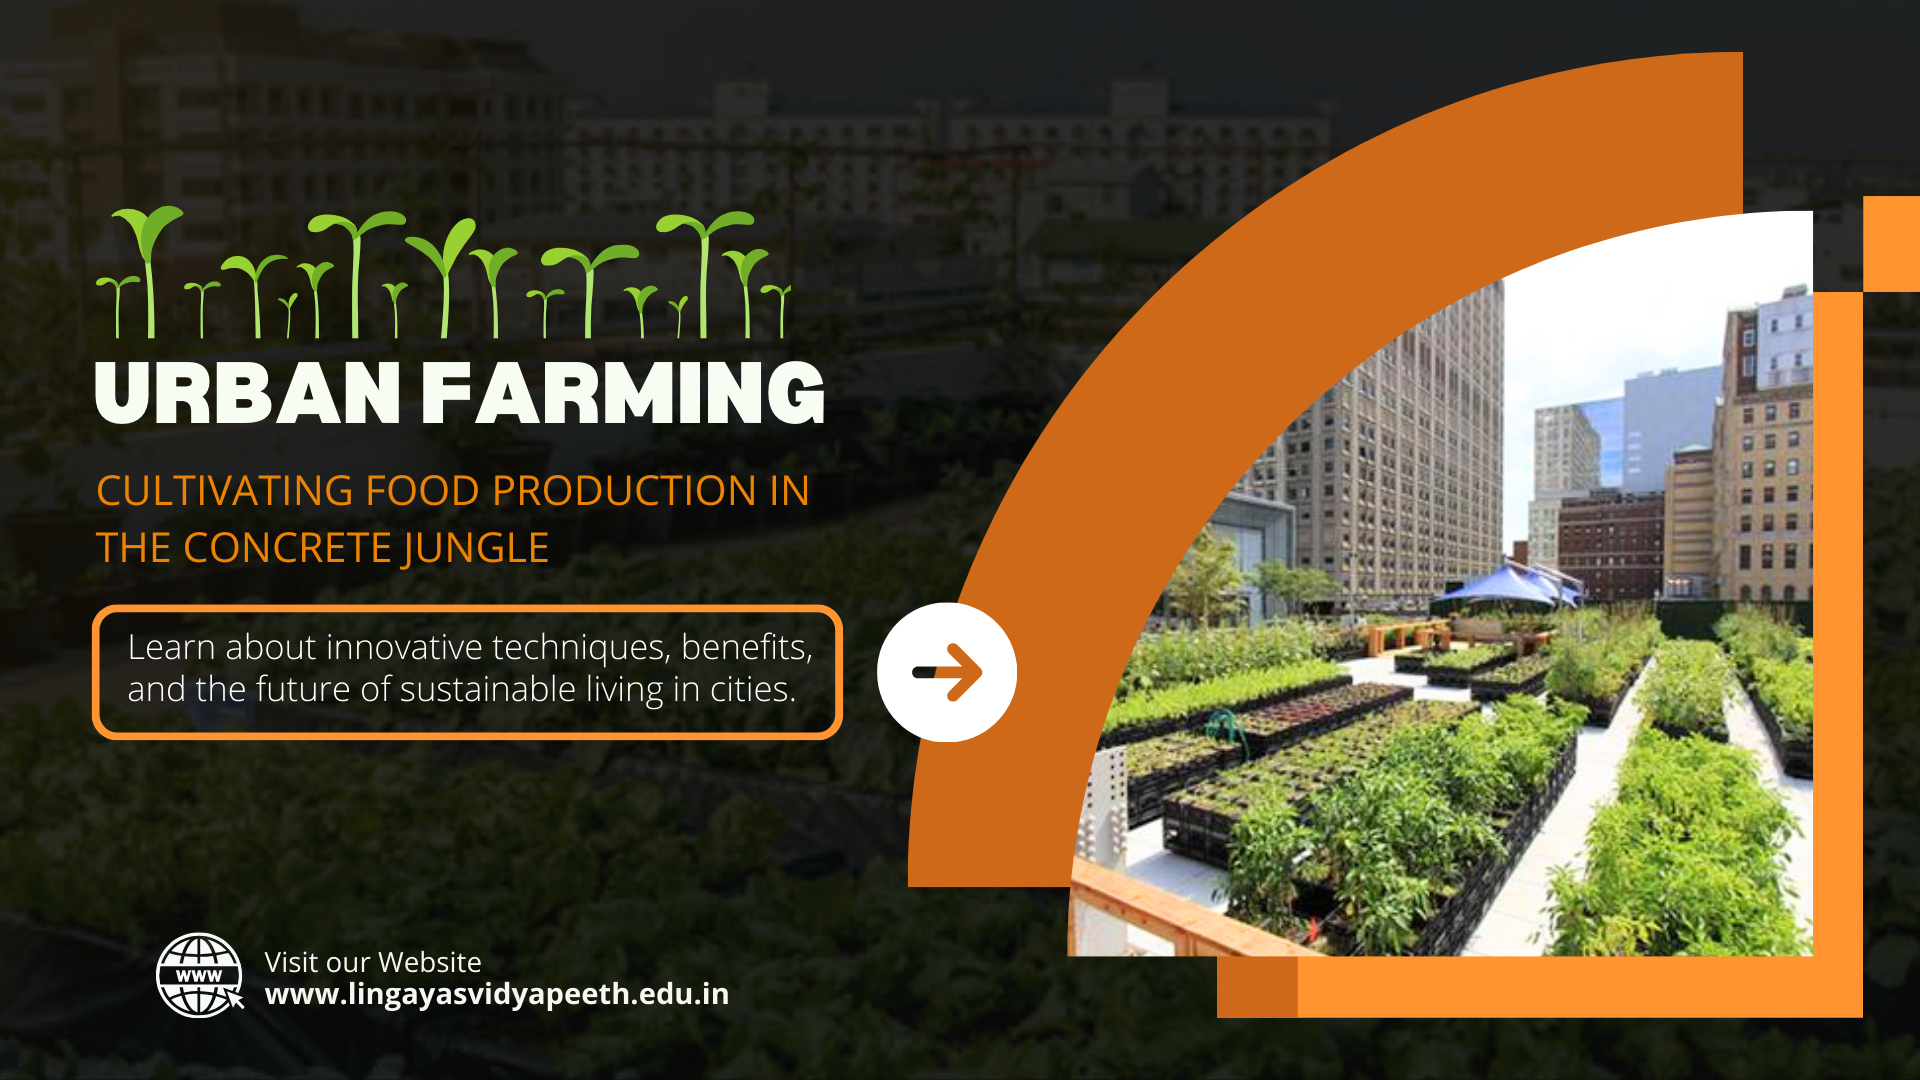 Urban Farming: Cultivating Food Production in the Concrete Jungle